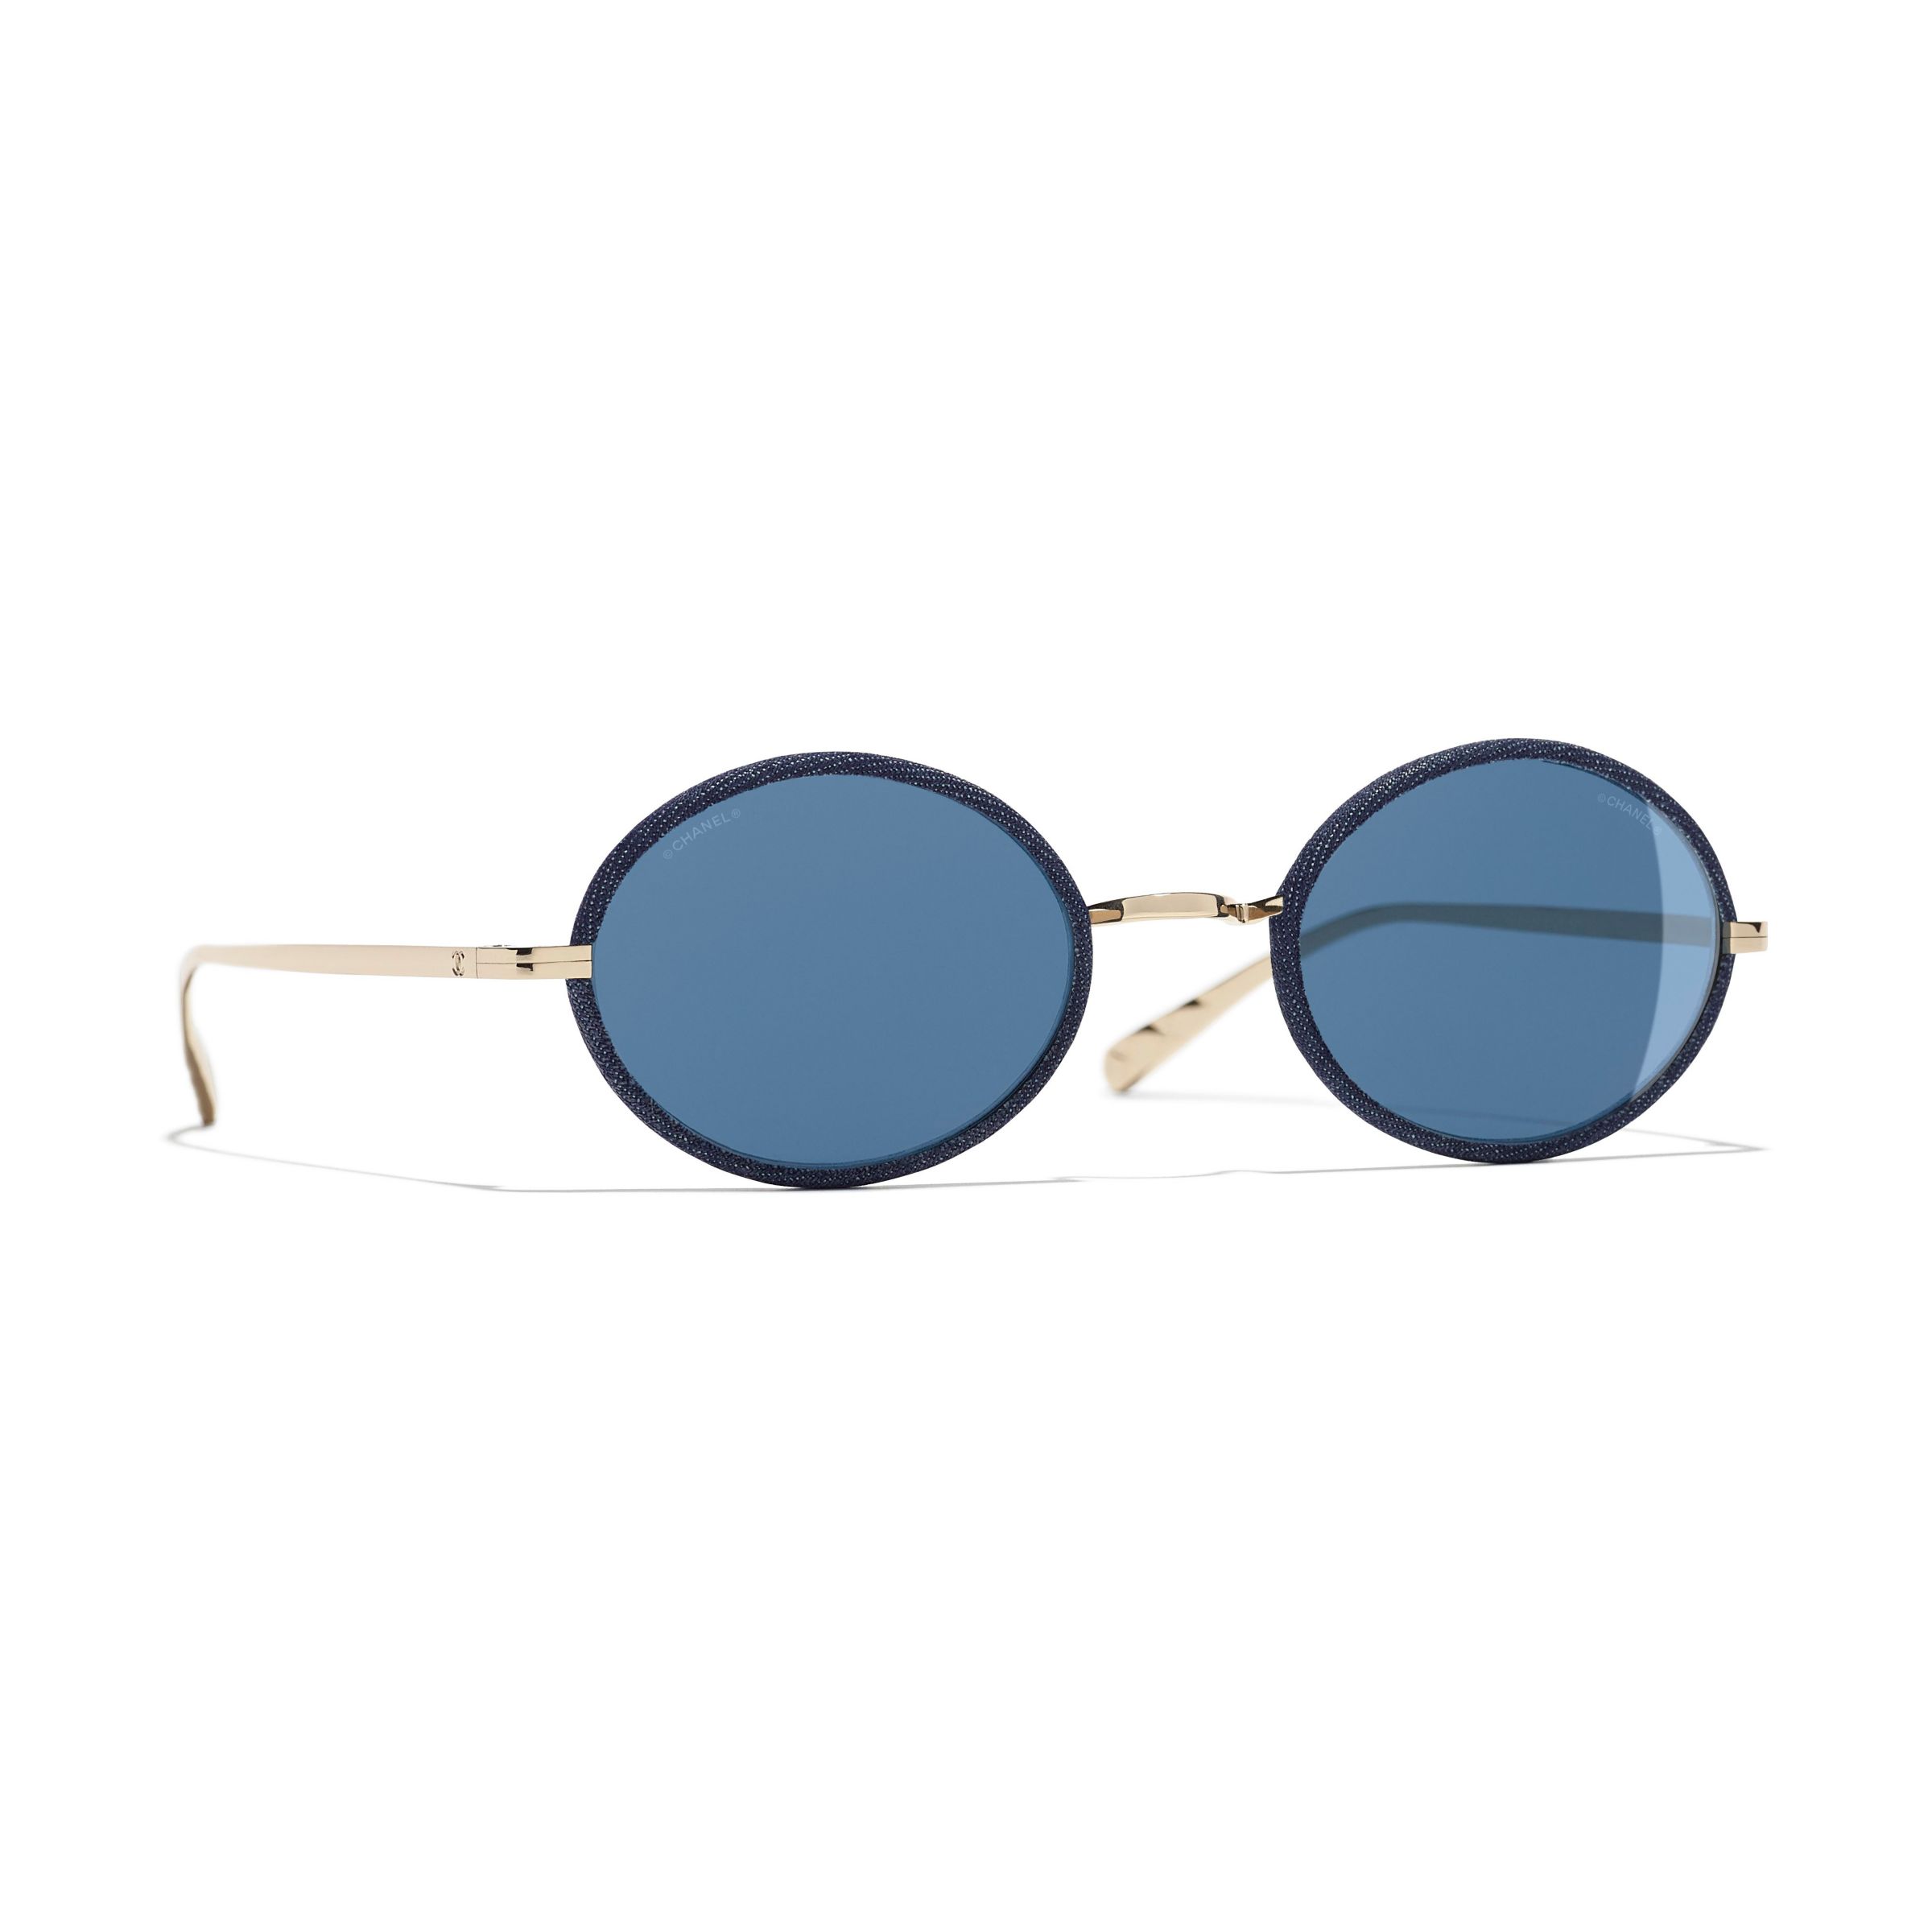 CHANEL Oval Sunglasses CH4248J Gold/Blue at John Lewis & Partners